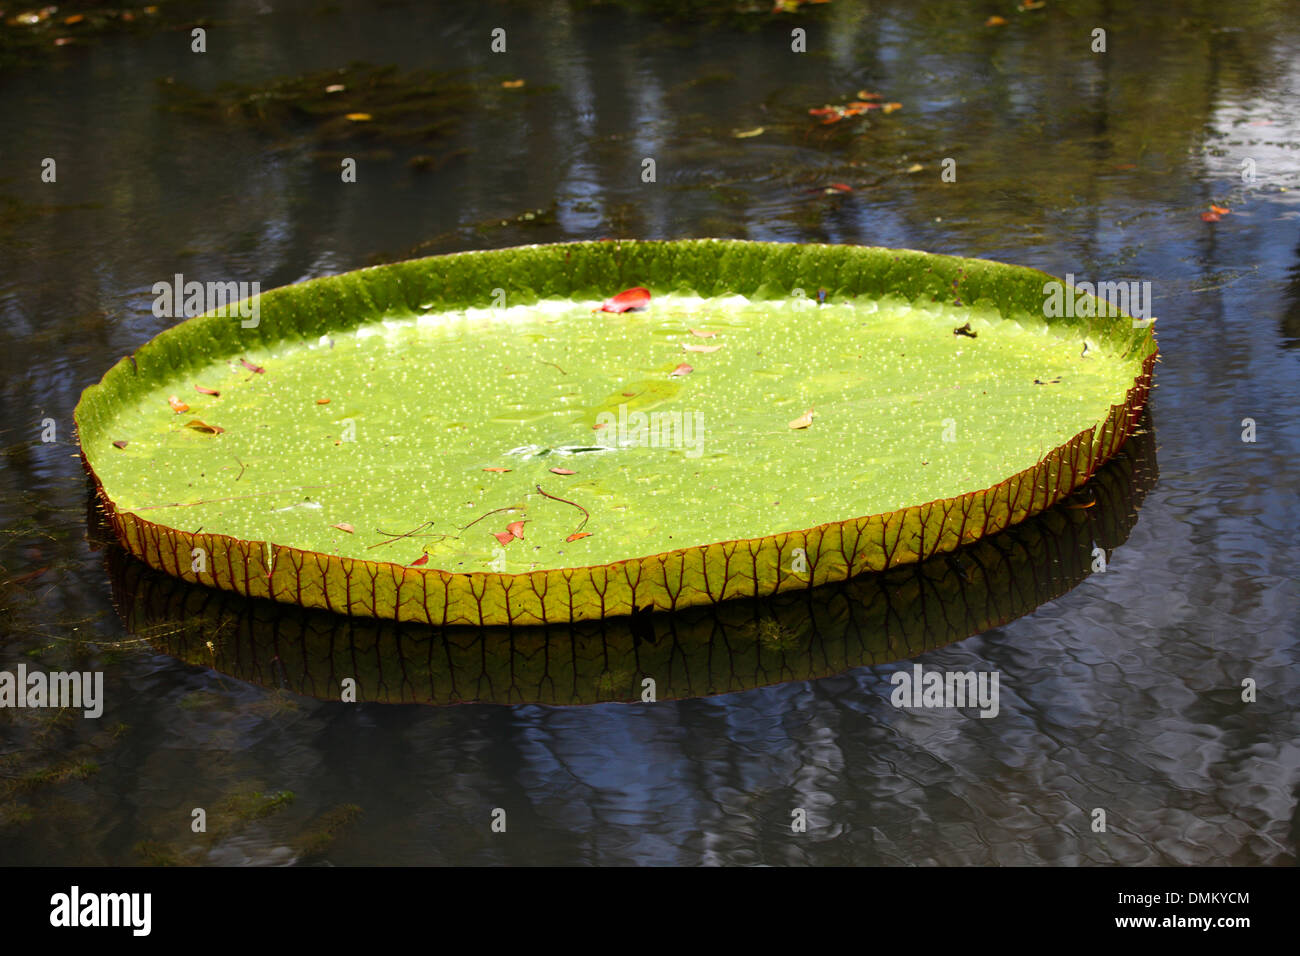 Victoria Amazonica leaf in the bathtub of the Botanical Garden of Pamplemousses in Mauritius island Stock Photo